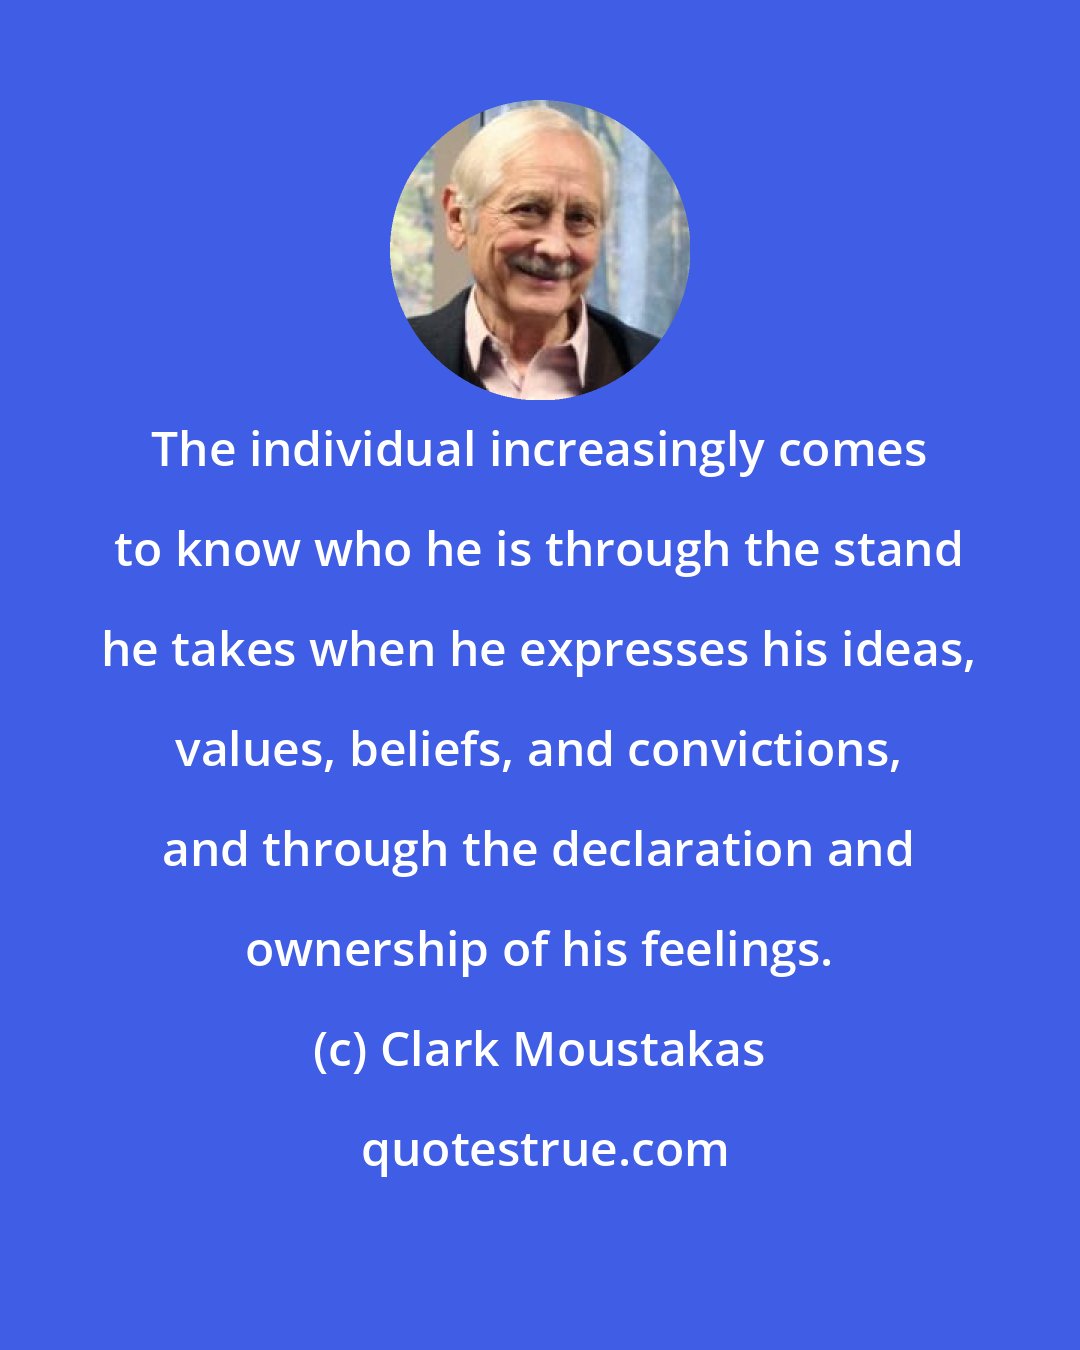 Clark Moustakas: The individual increasingly comes to know who he is through the stand he takes when he expresses his ideas, values, beliefs, and convictions, and through the declaration and ownership of his feelings.